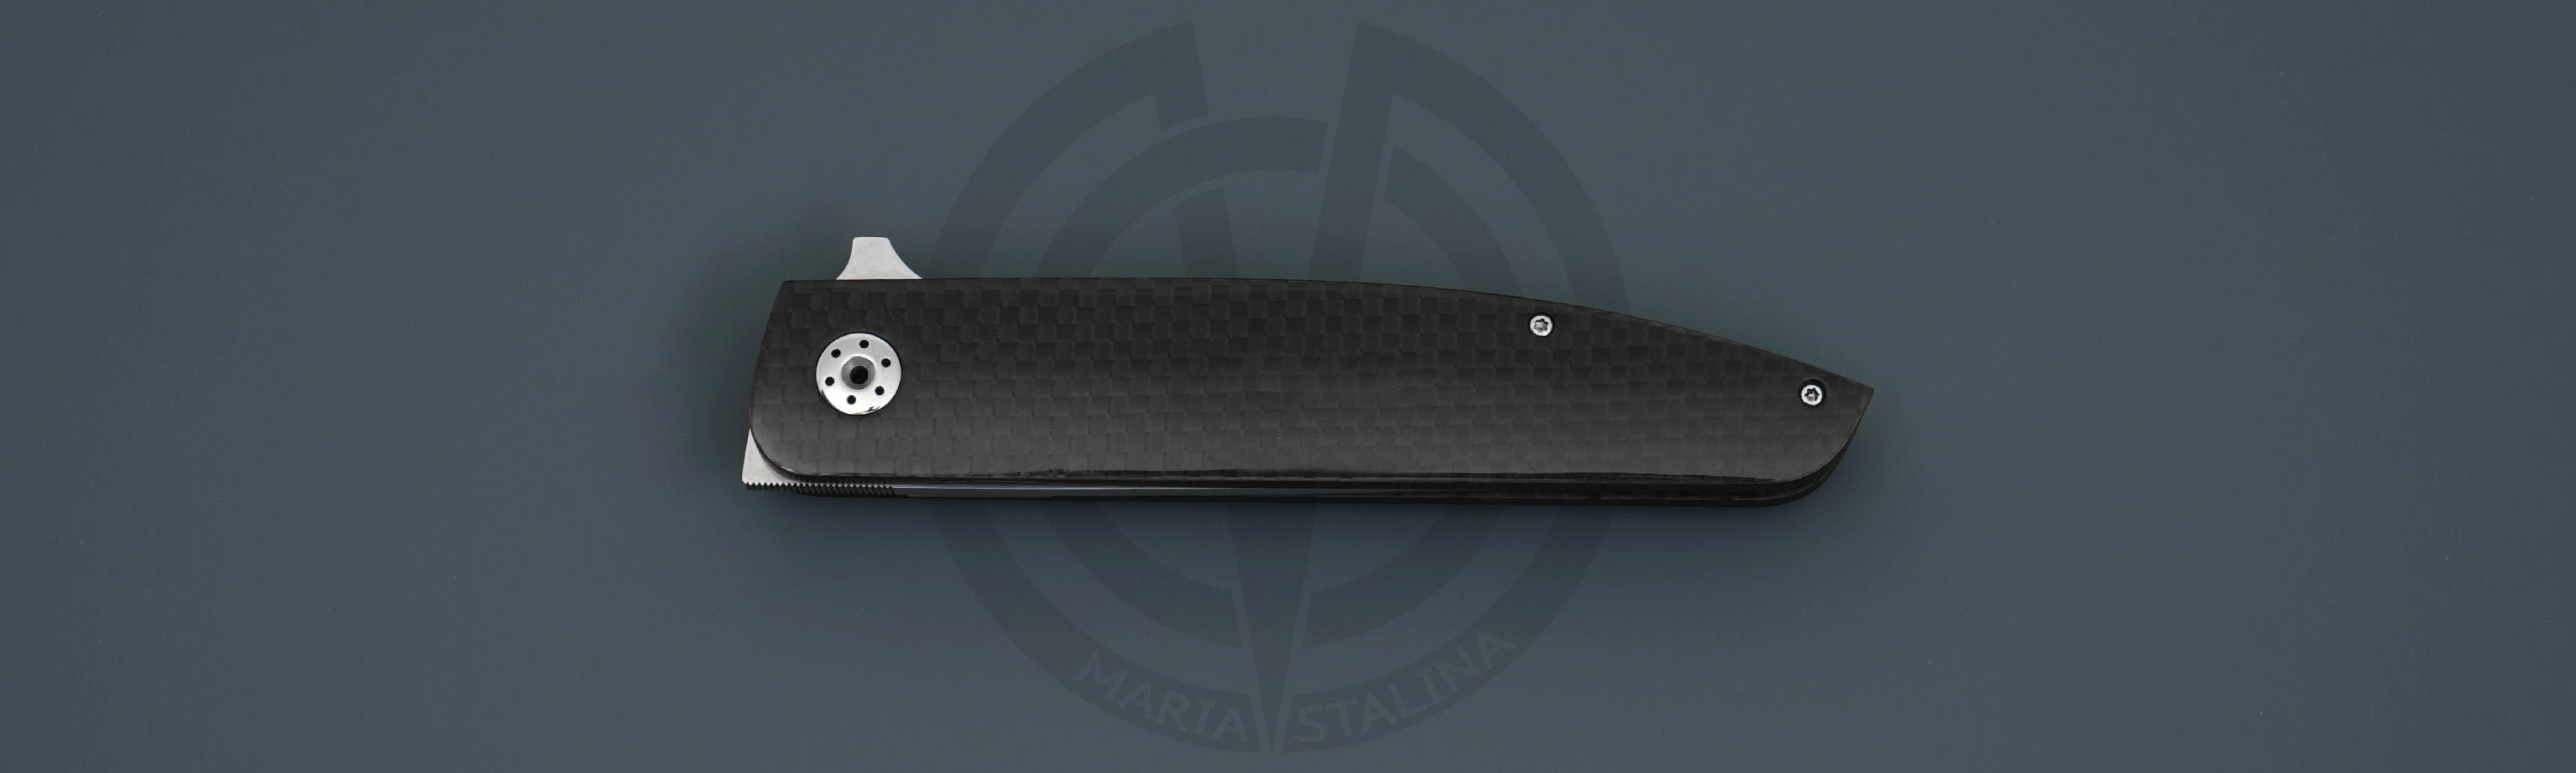 Carbon handle of the City flipper